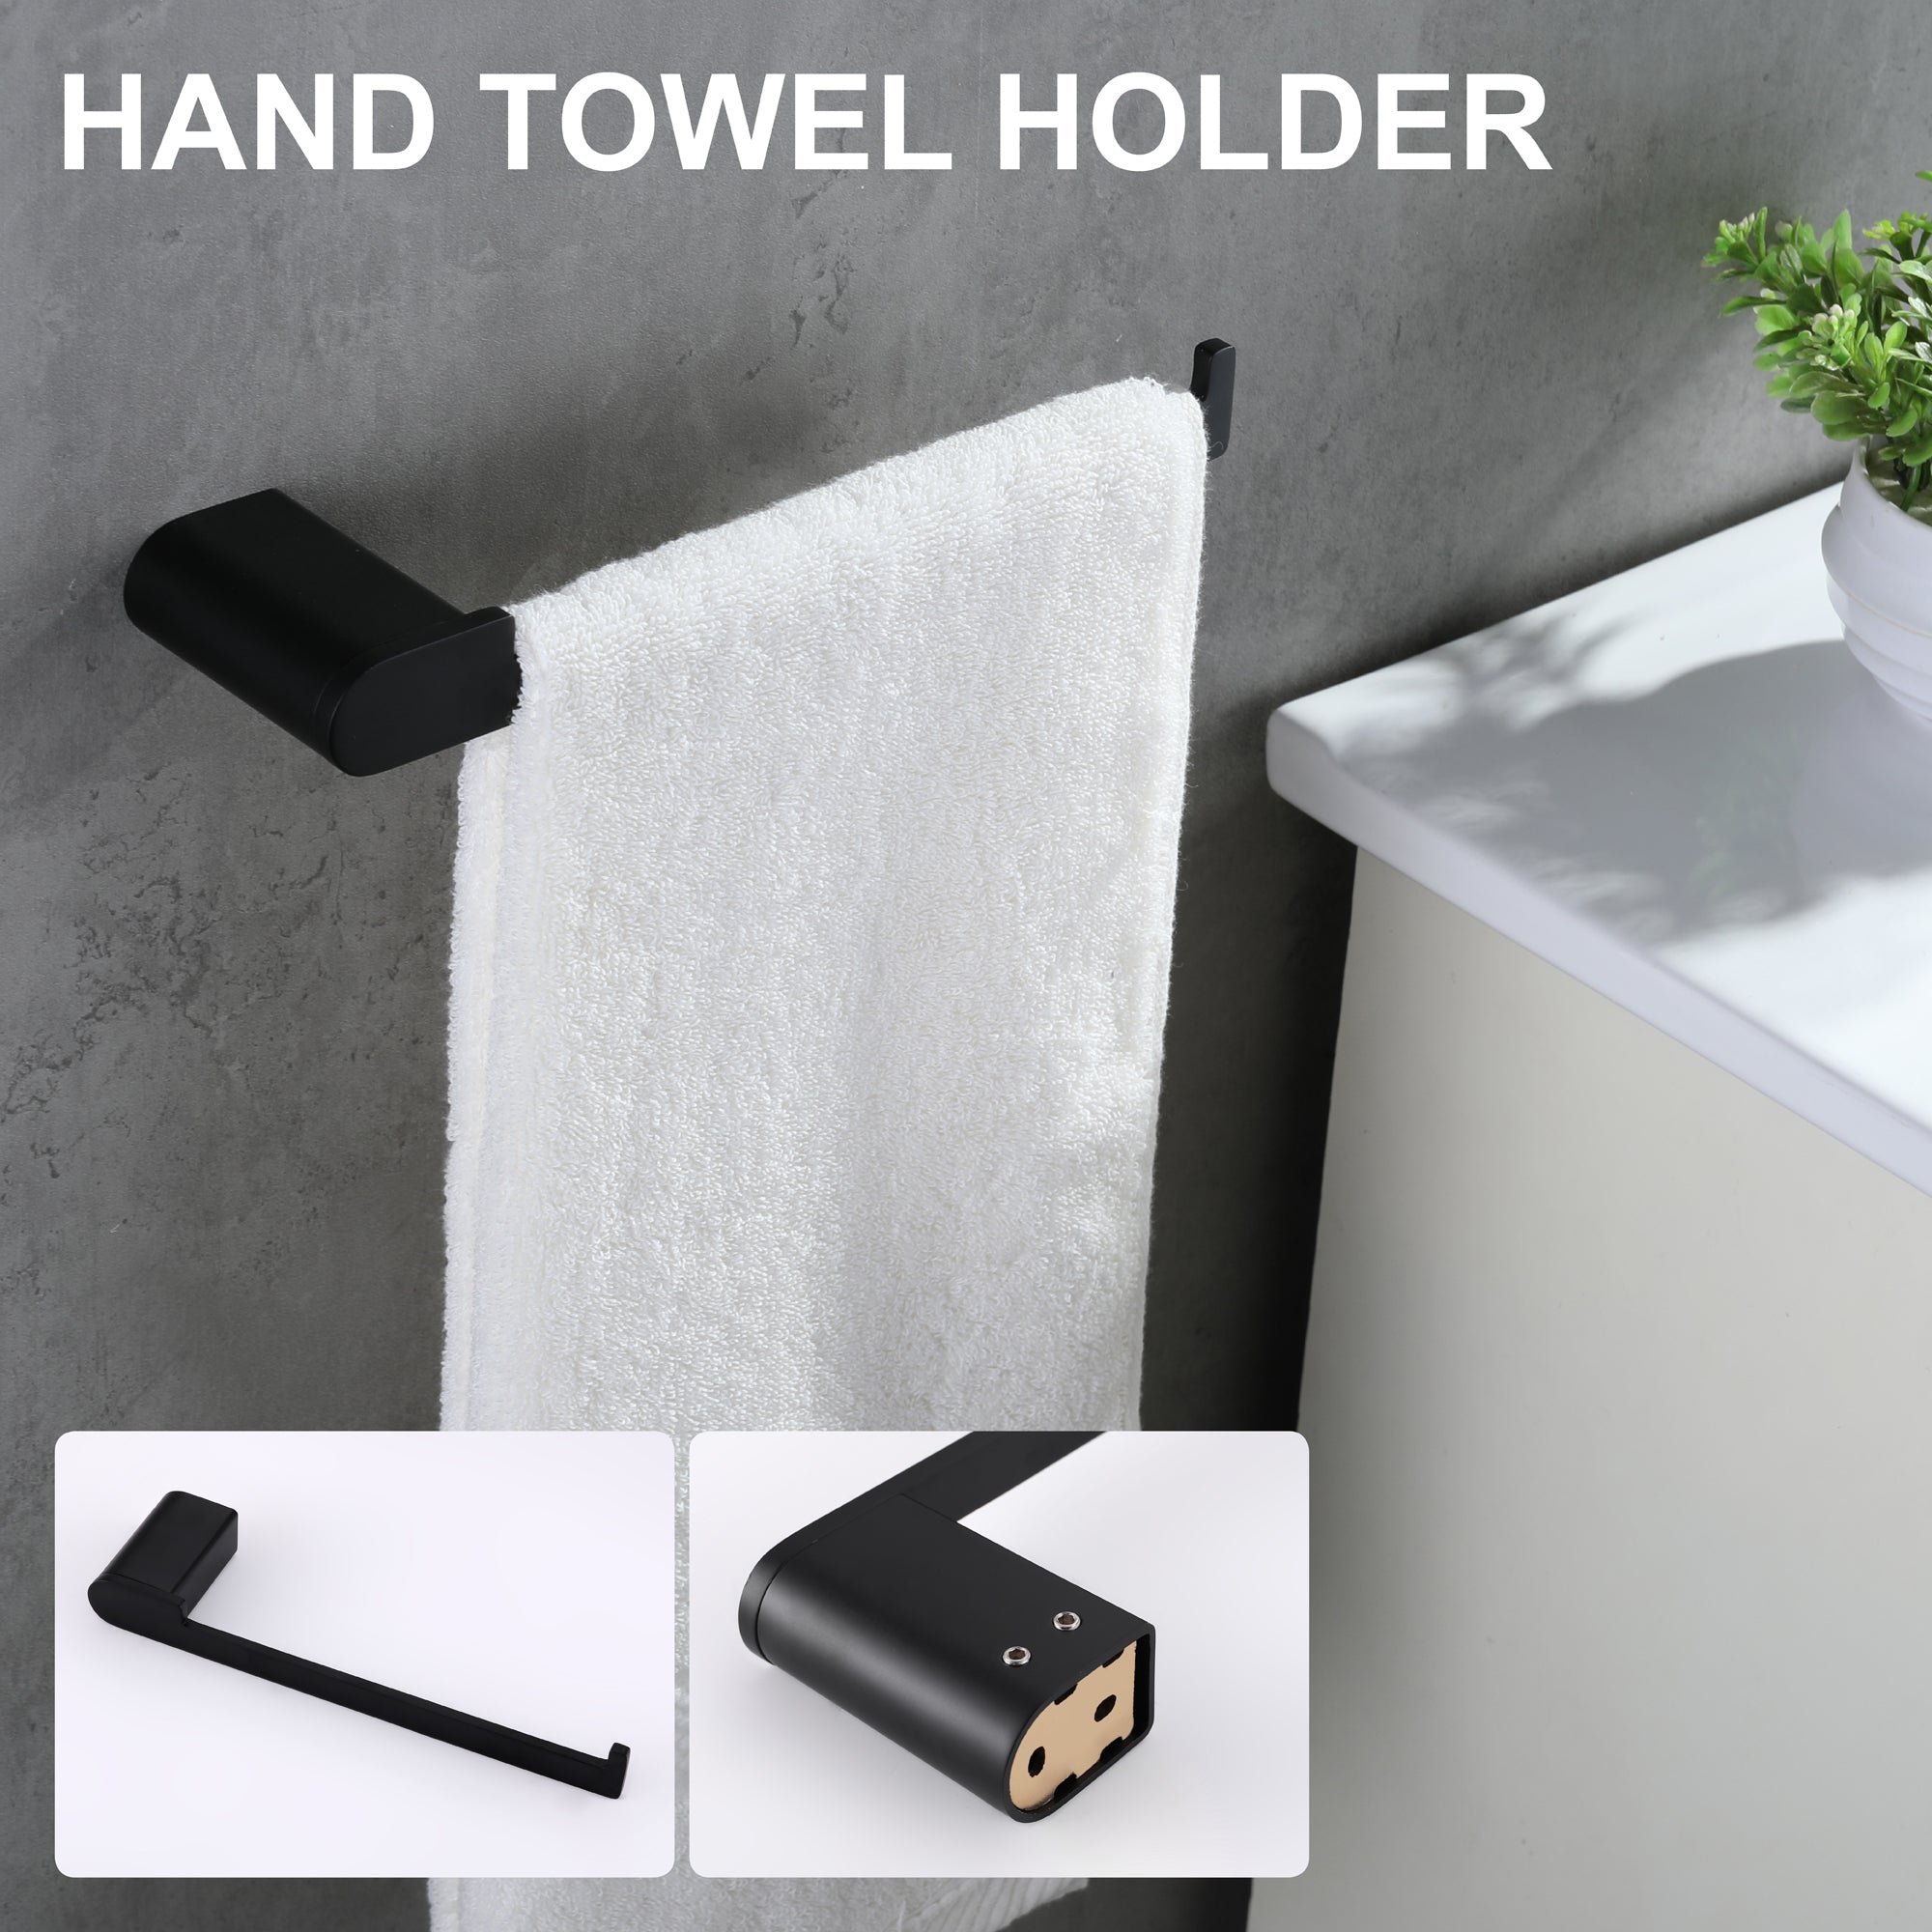 Better Homes & Gardens Steel 5PC Bath Hardware and Towel Holder